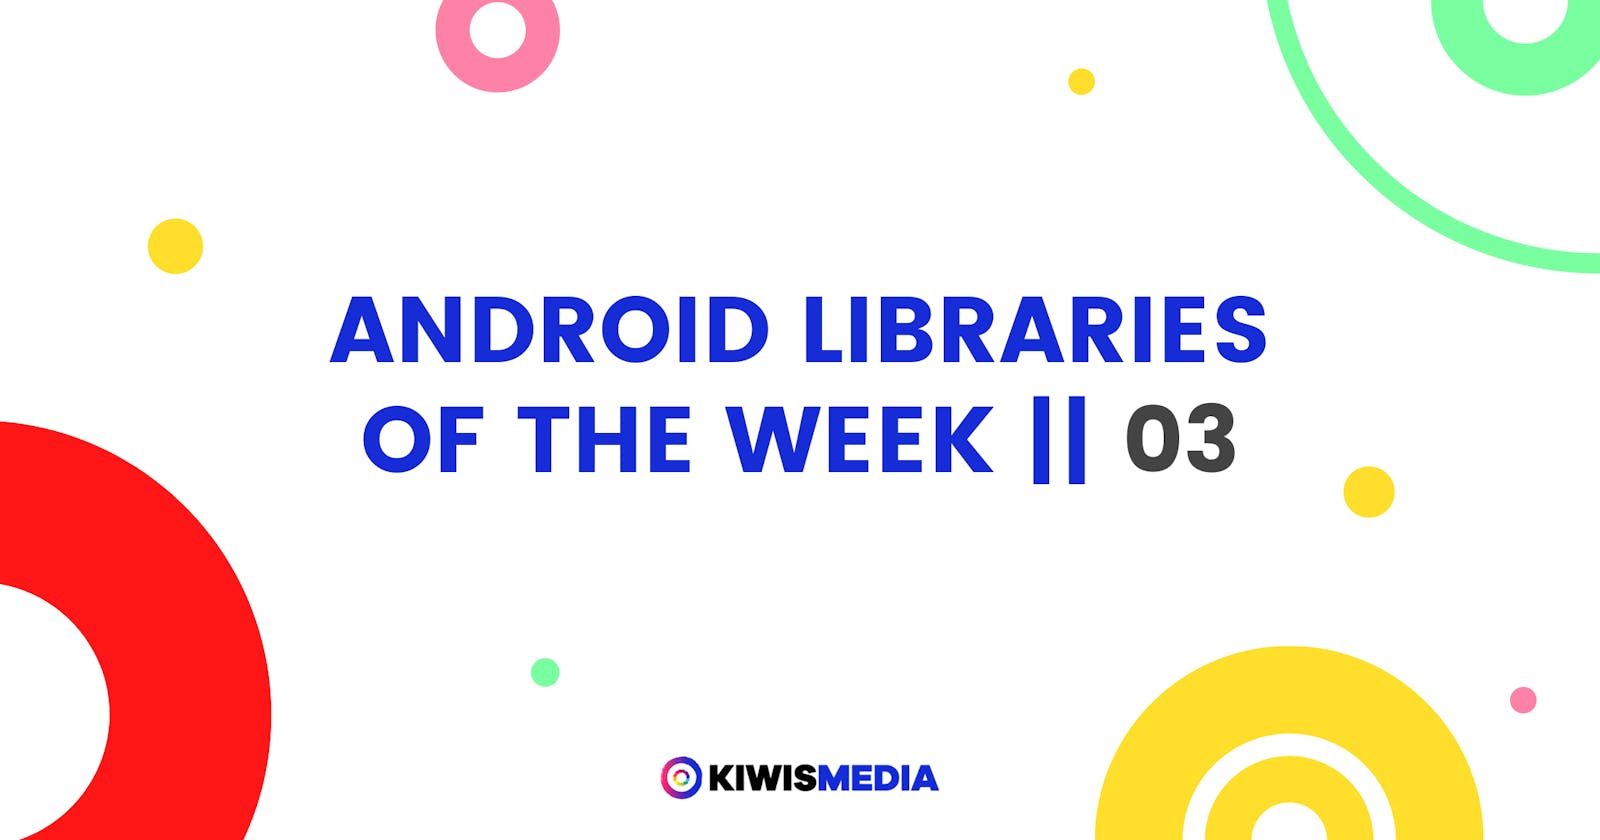 Android Libraries of the Week || 03